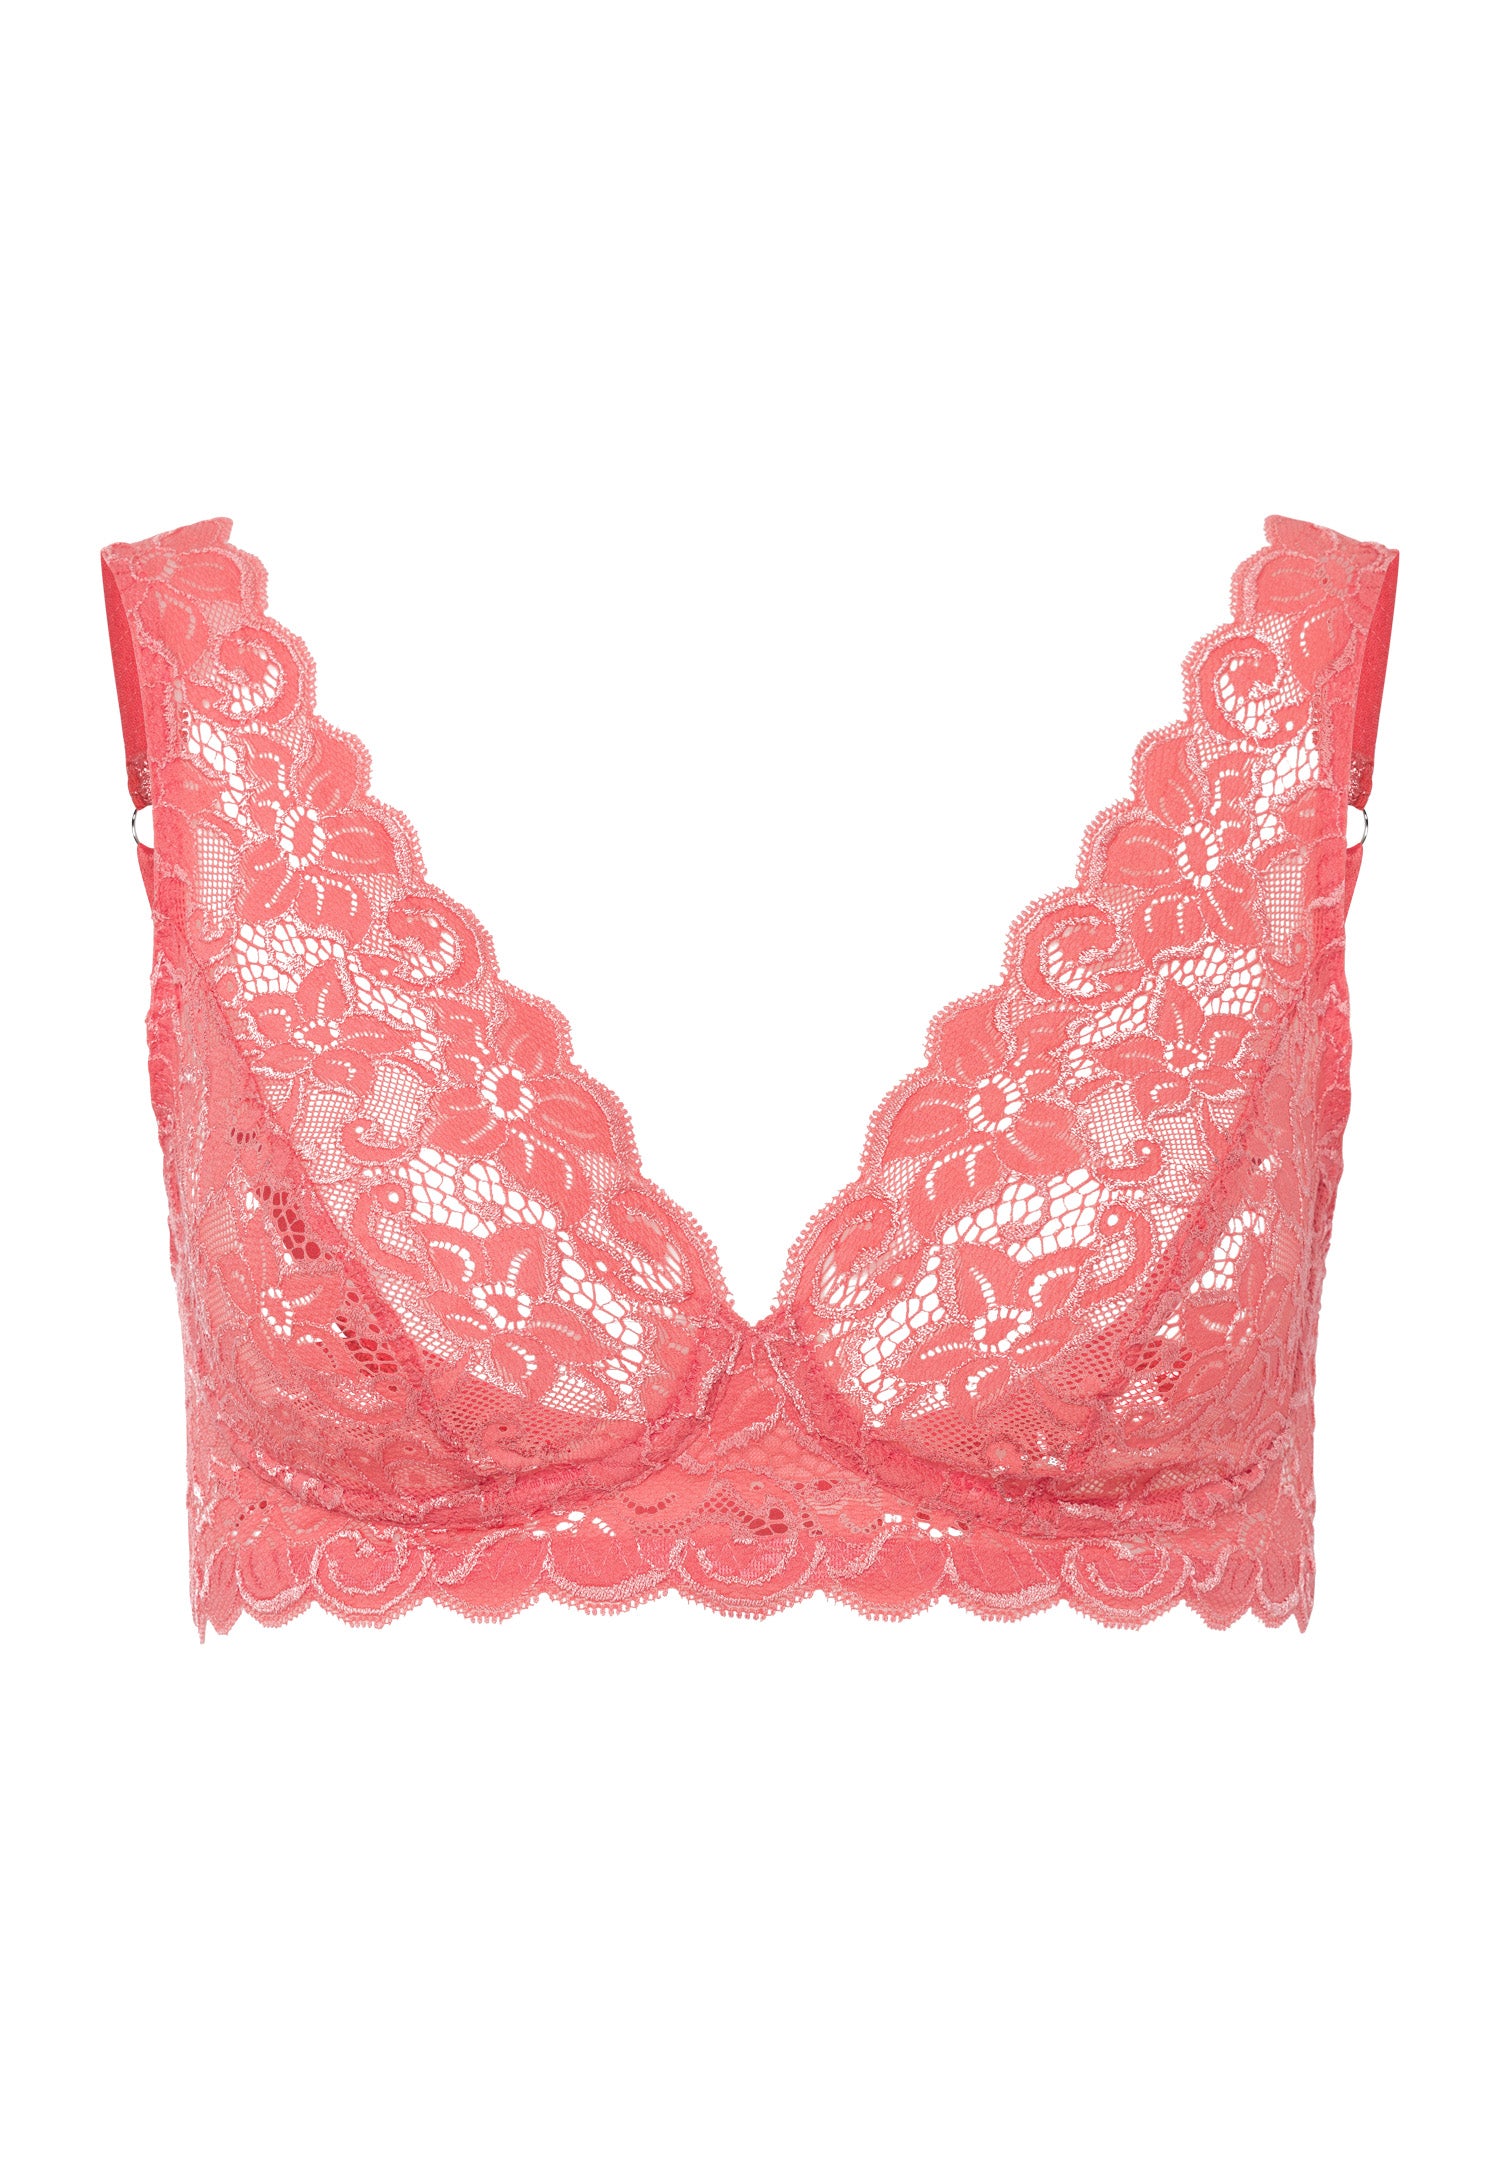 71465 Luxury Moments Lace Soft Cup Bra - 2309 Porcelain Rose